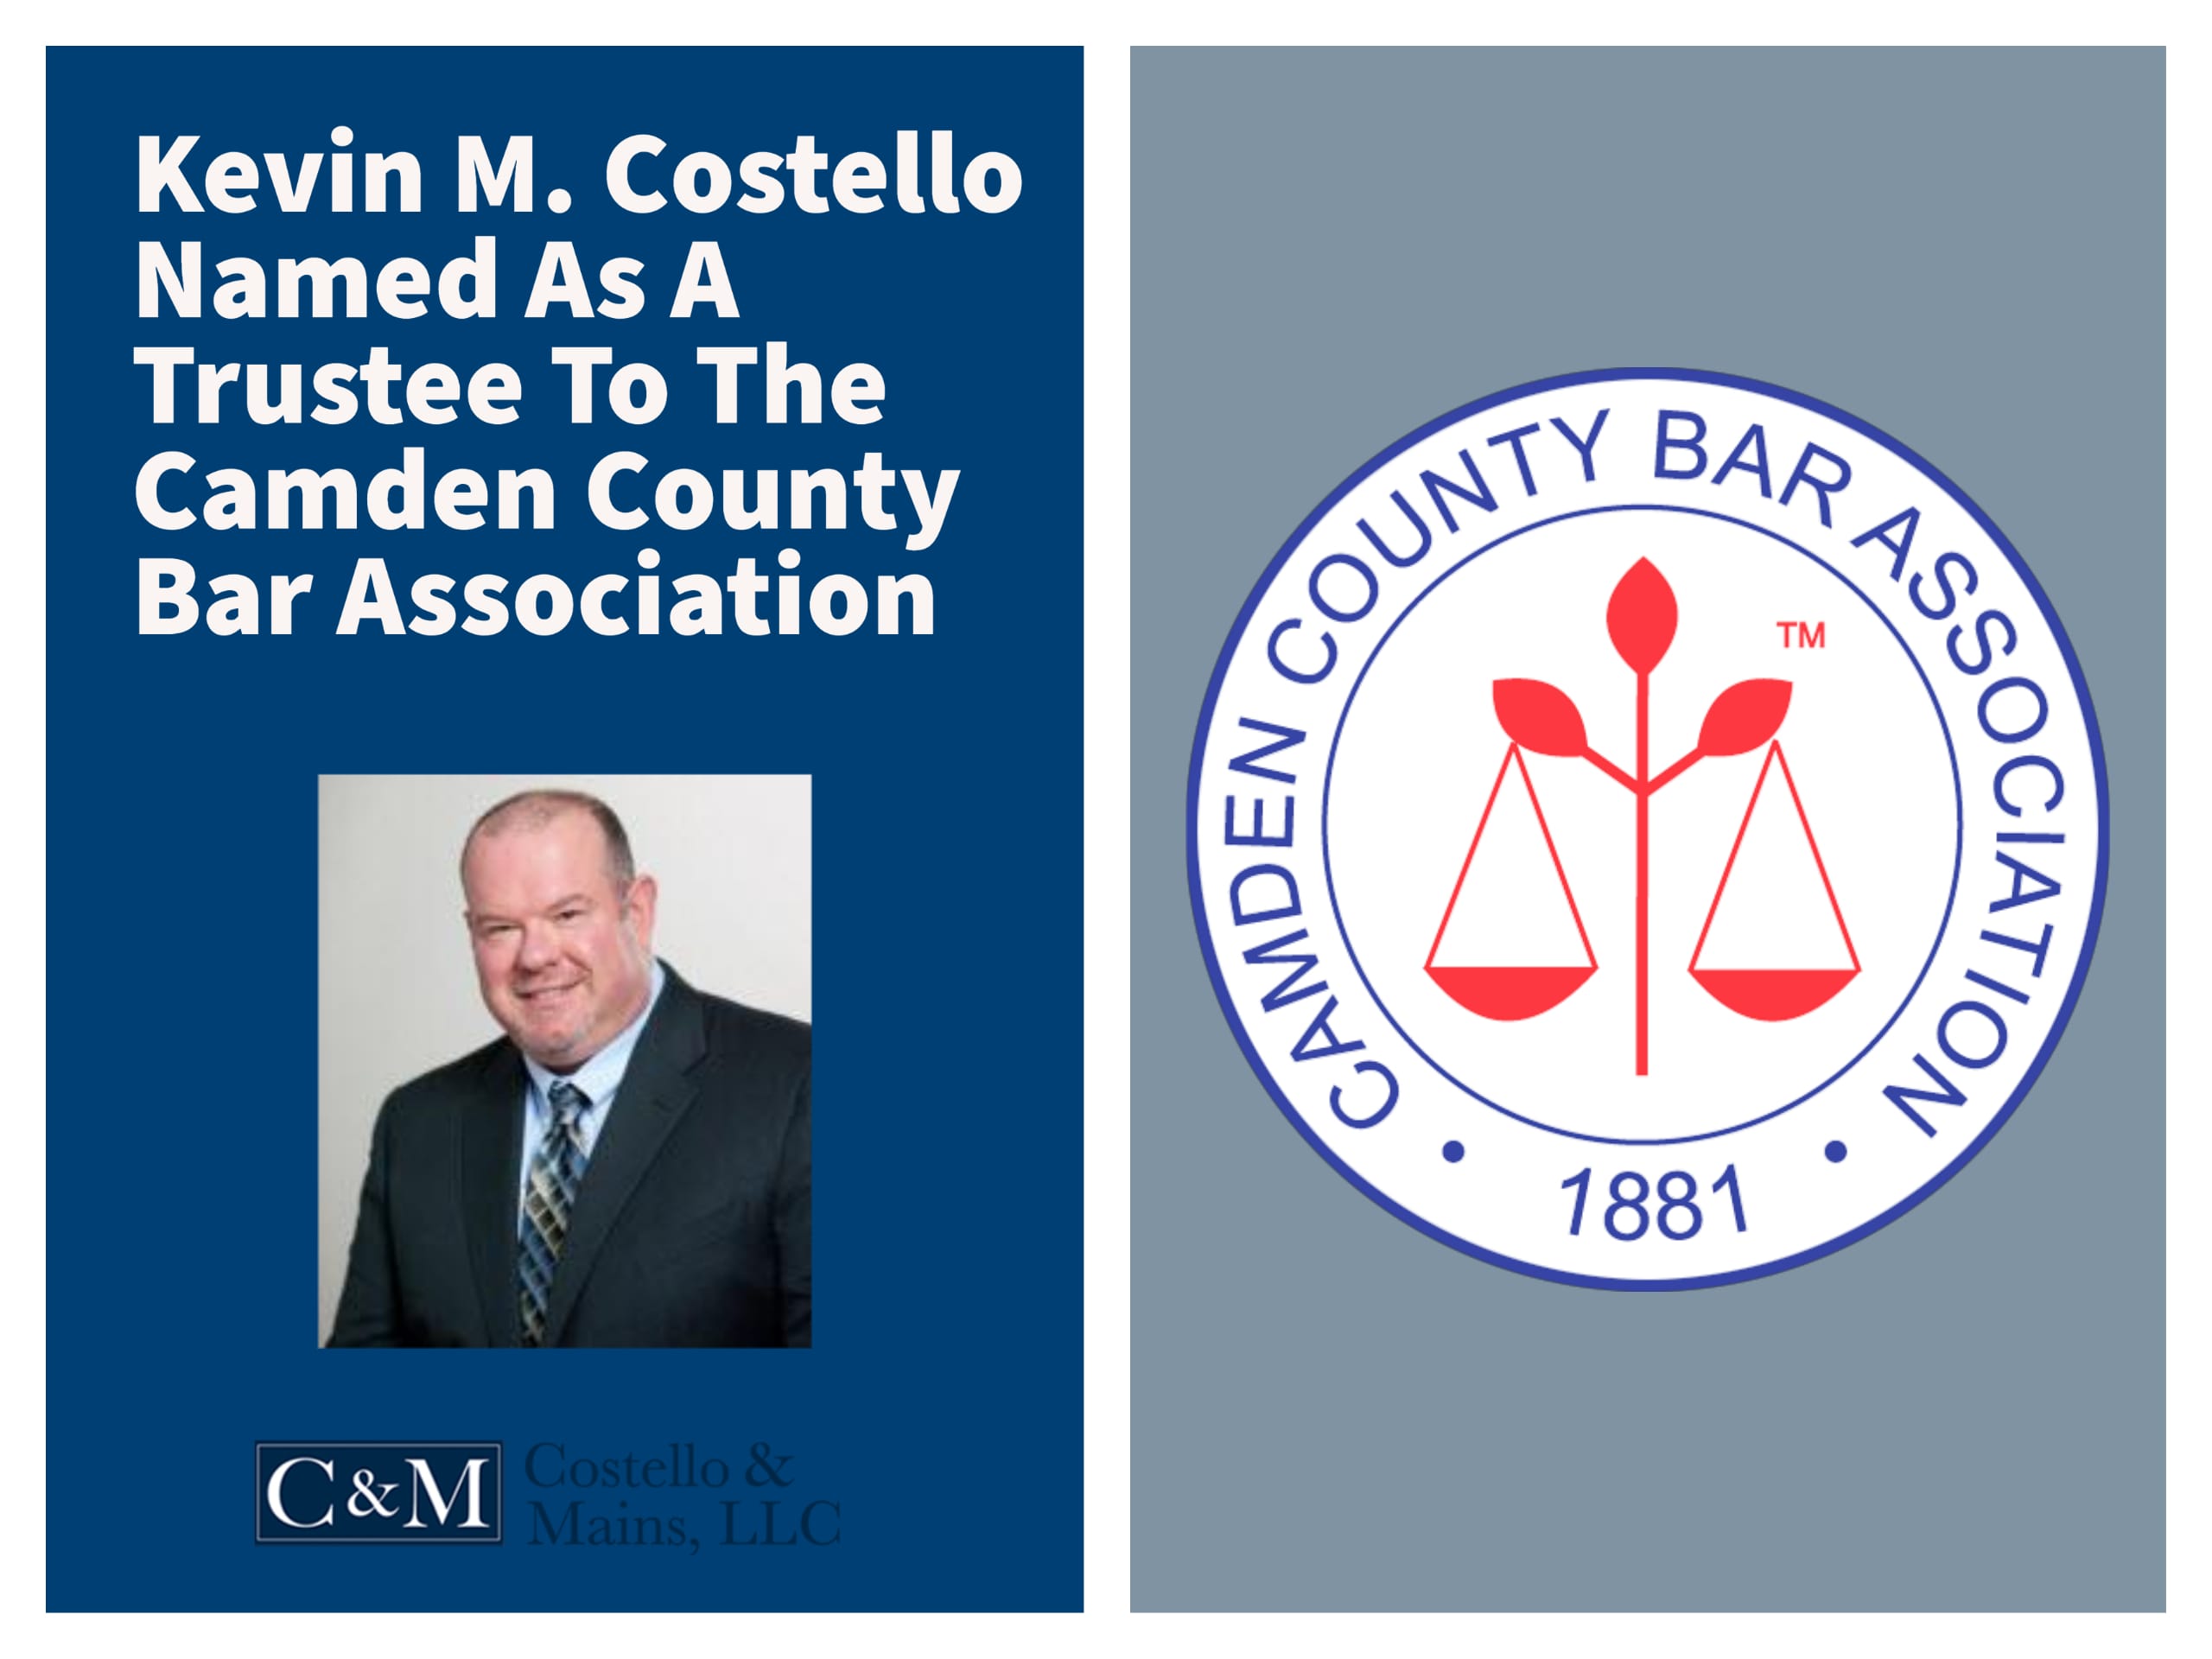 Kevin M. Costello named as a trustee to the Camden County Bar Association | Camden County Bar Association 1881